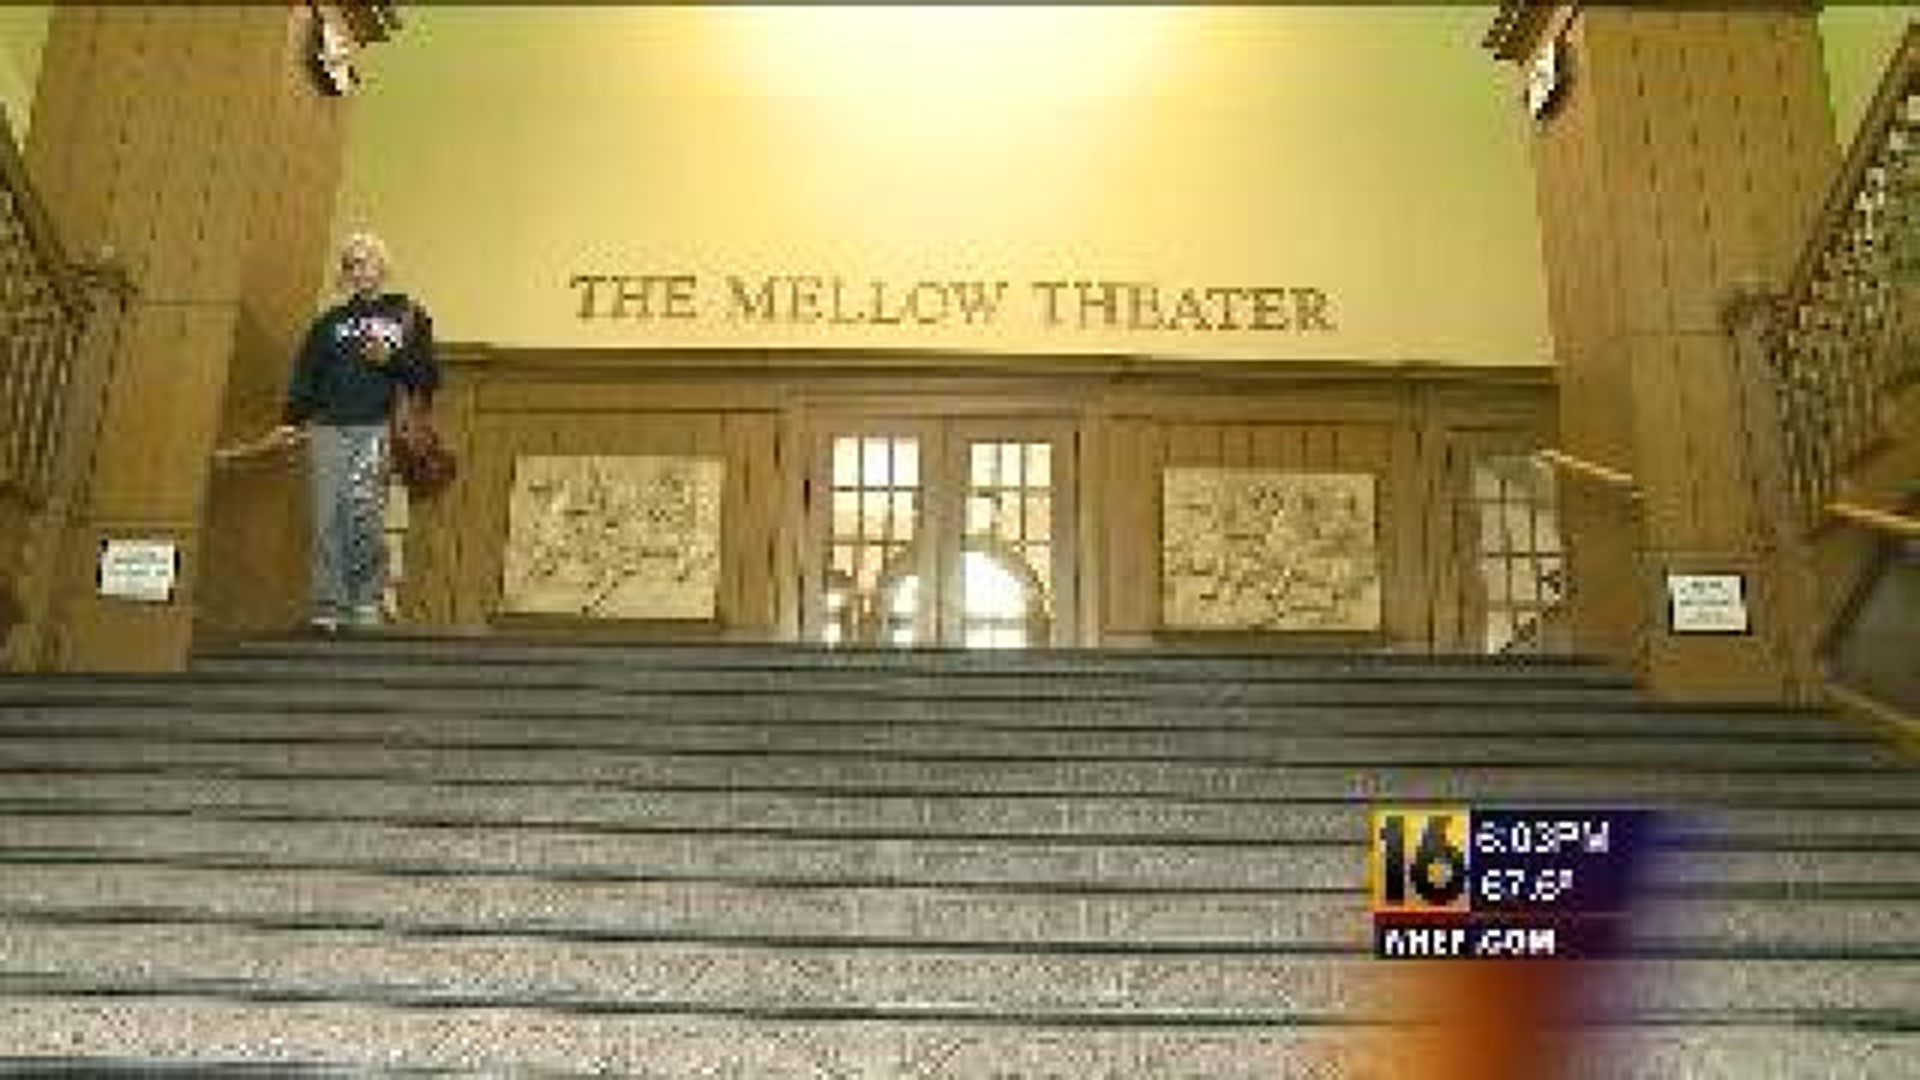 Mellow\'s Name on Buildings Now Controversial